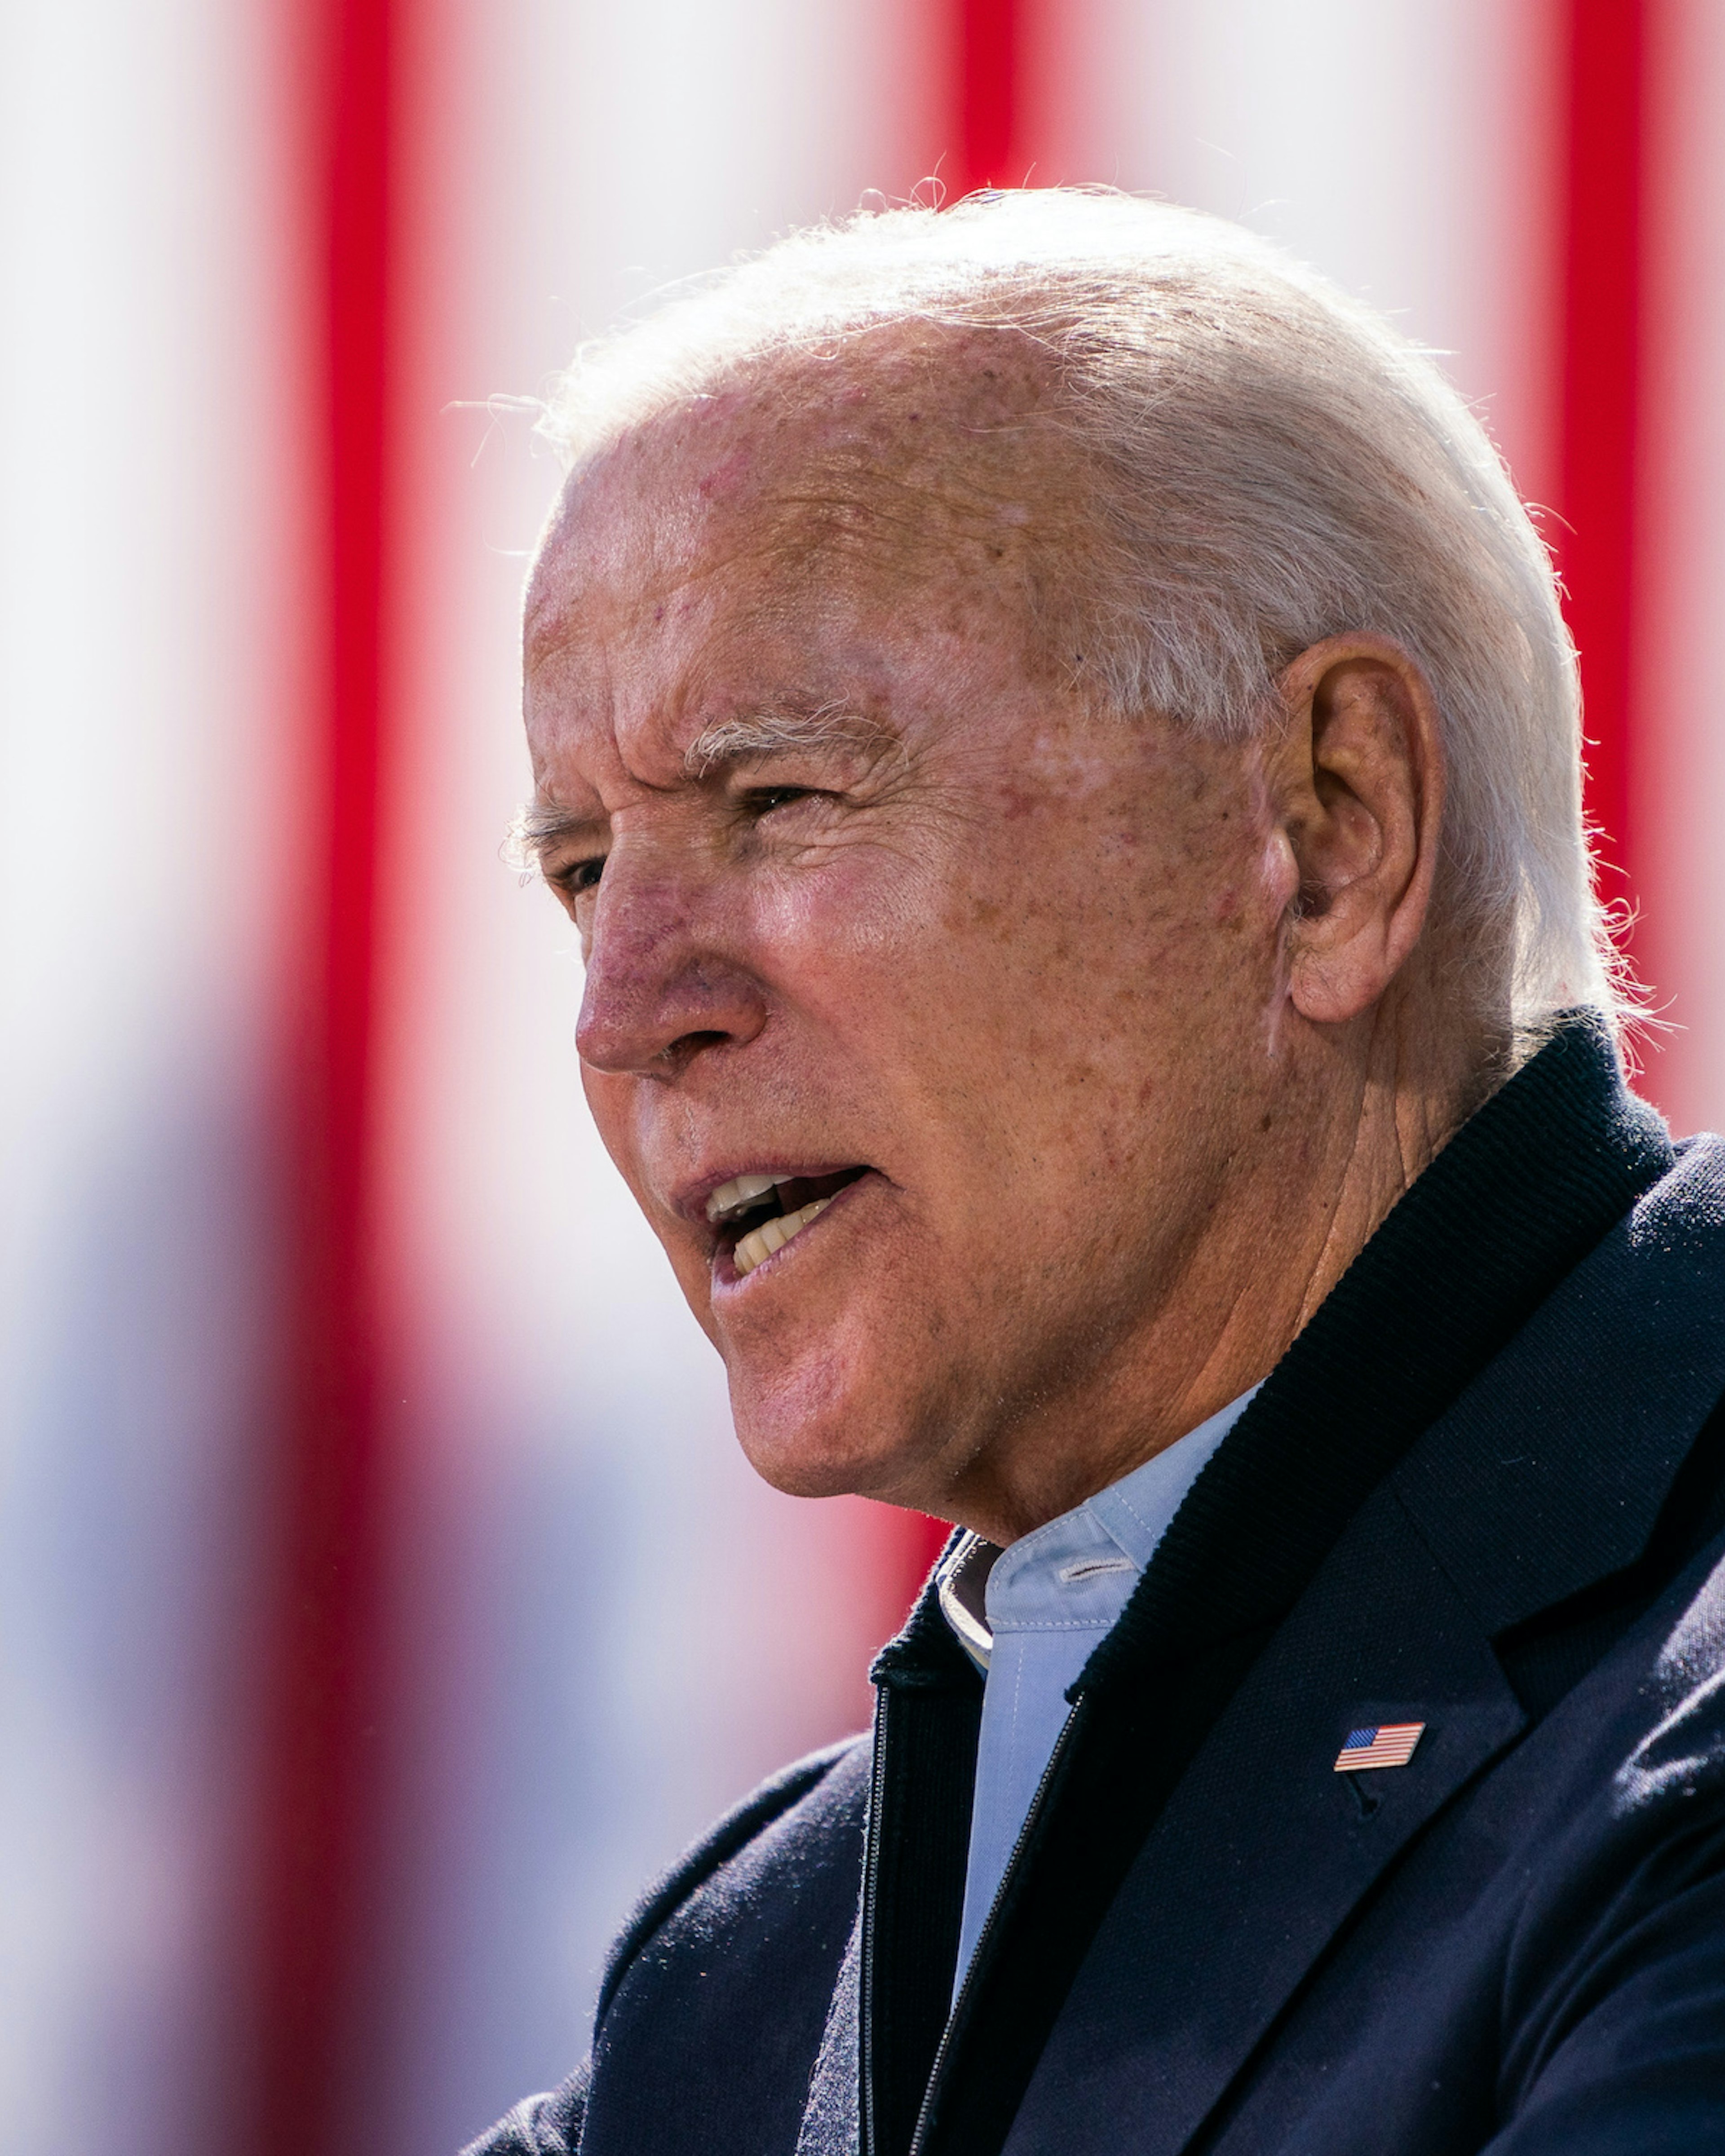 Presidential nominee Joe Biden speaks during a Voter Mobilization event at Riverside High School in Durham, North Carolina on October 18, 2020. (Photo by Demetrius Freeman/The Washington Post via Getty Images)